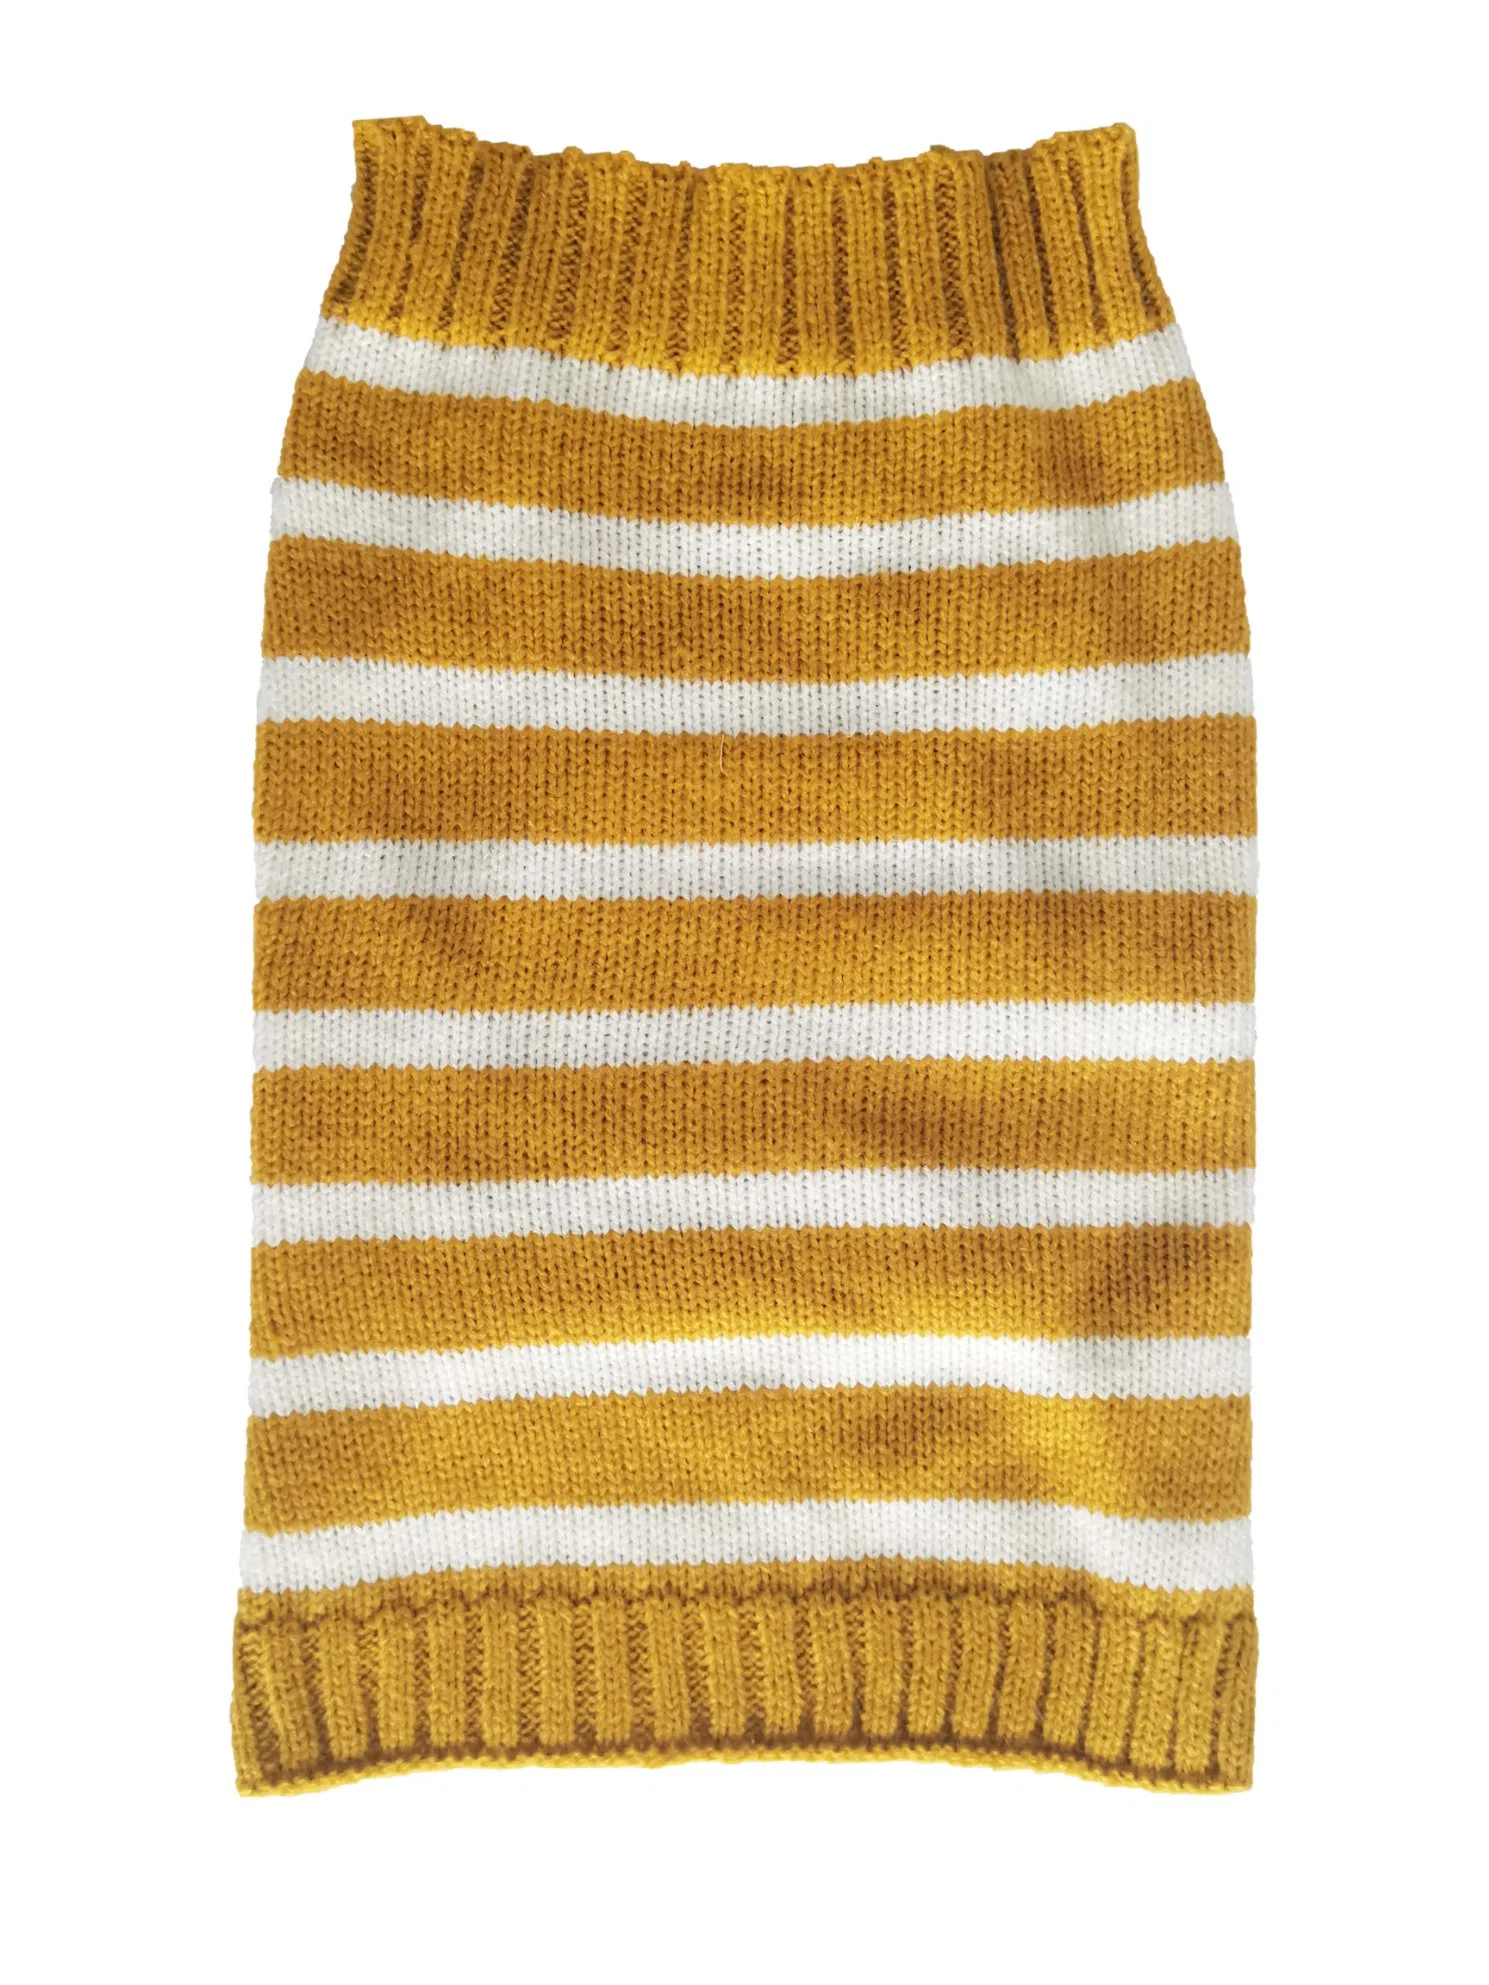 Winter Holiday Yellow Stripe Dog fitness Knitted Sweater Pet Apparel